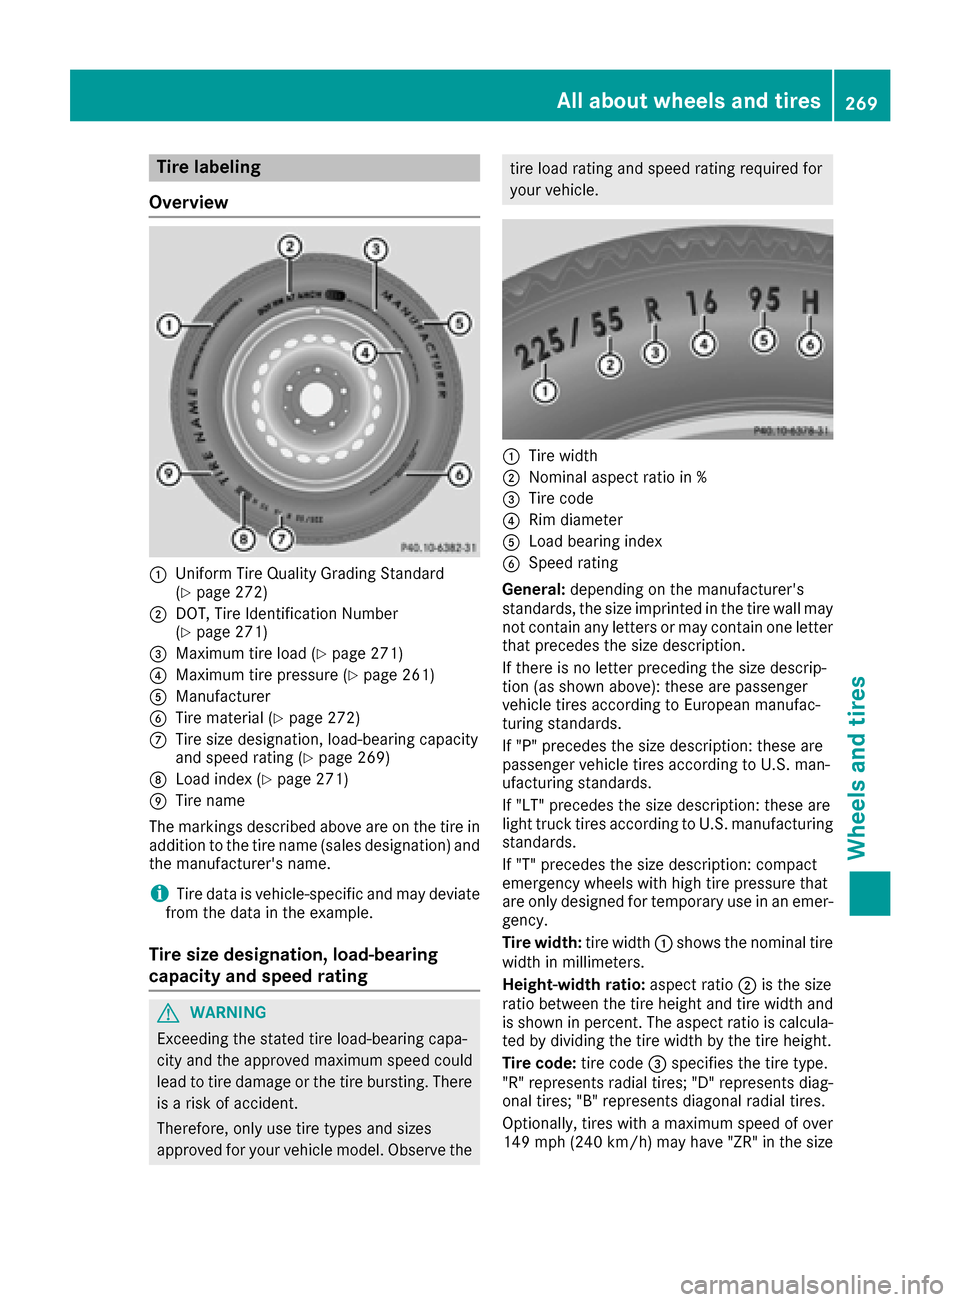 MERCEDES-BENZ SLC-Class 2017 R172 Owners Manual Tire labeling
Overview
:Unifor mTireQ ualit yGradin gStandard
(Ypage 272)
;DOT, Tire Identification Number
(Ypage 271)
=Maximum tire load (Ypage 271)
?Maximum tire pressure (Ypage 261)
AManufacturer
B